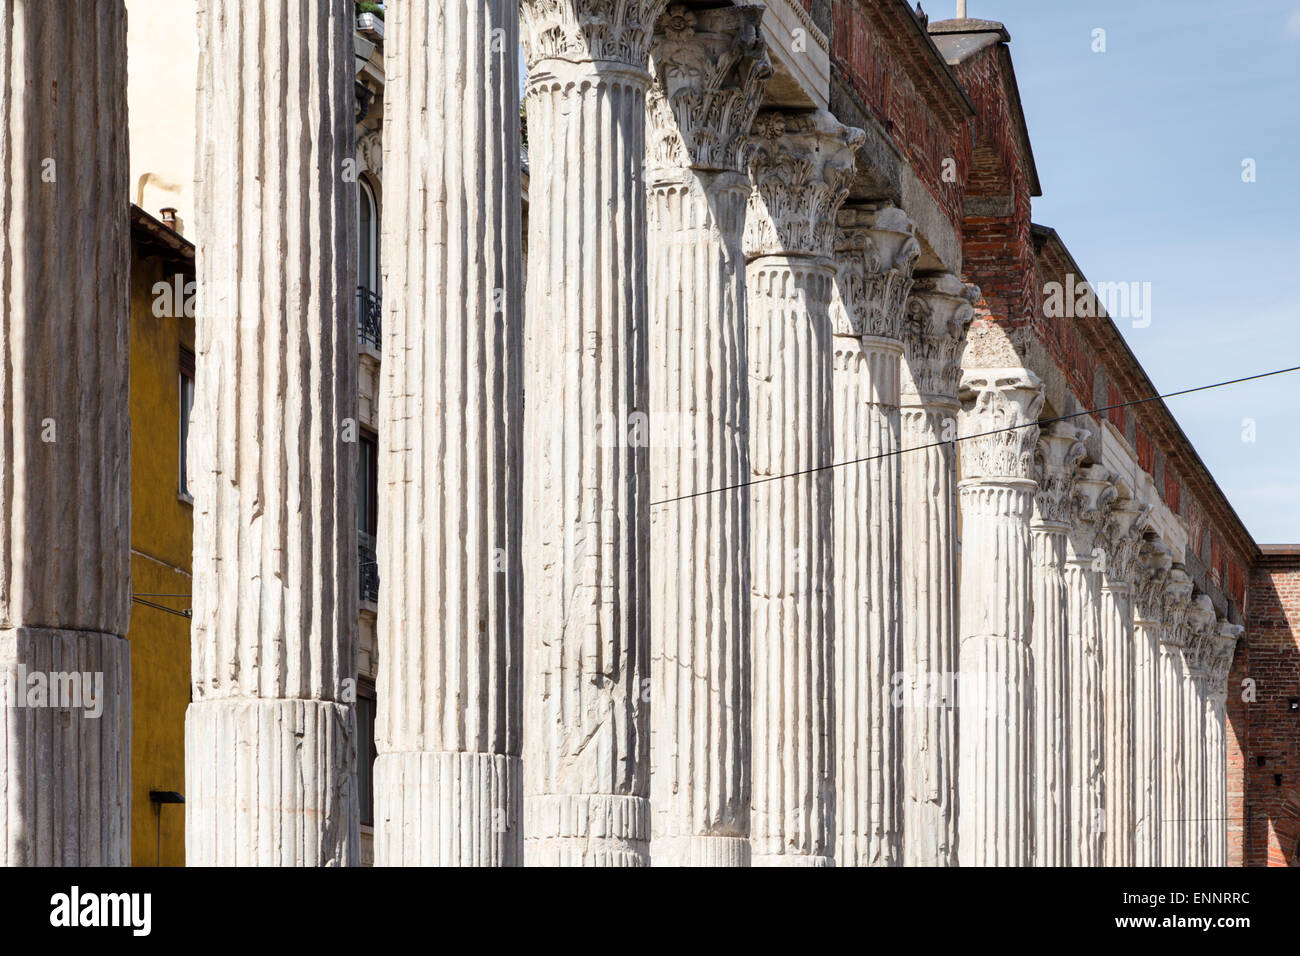 Colonnade of ancient Roman Corinthian columns in front of the church of San Lorenzo, Milan. Stock Photo